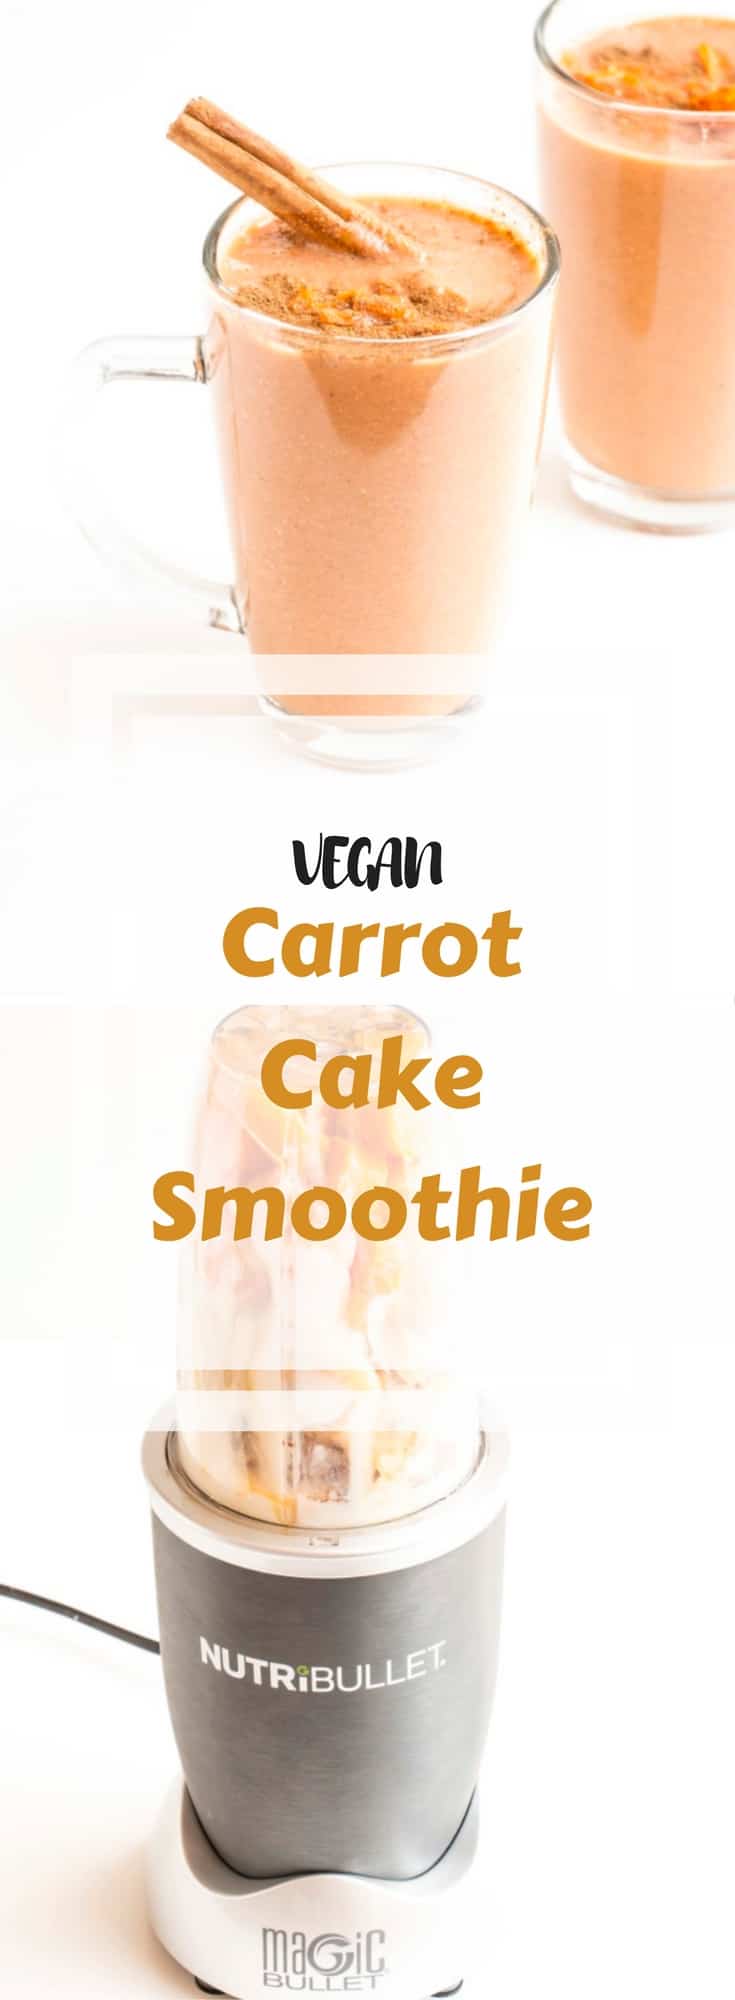 Easy to make vegan Healthy Carrot Cake Smoothie recipe. The perfect on the go breakfast or snack. Made with fresh carrots and a variety of warm spices.